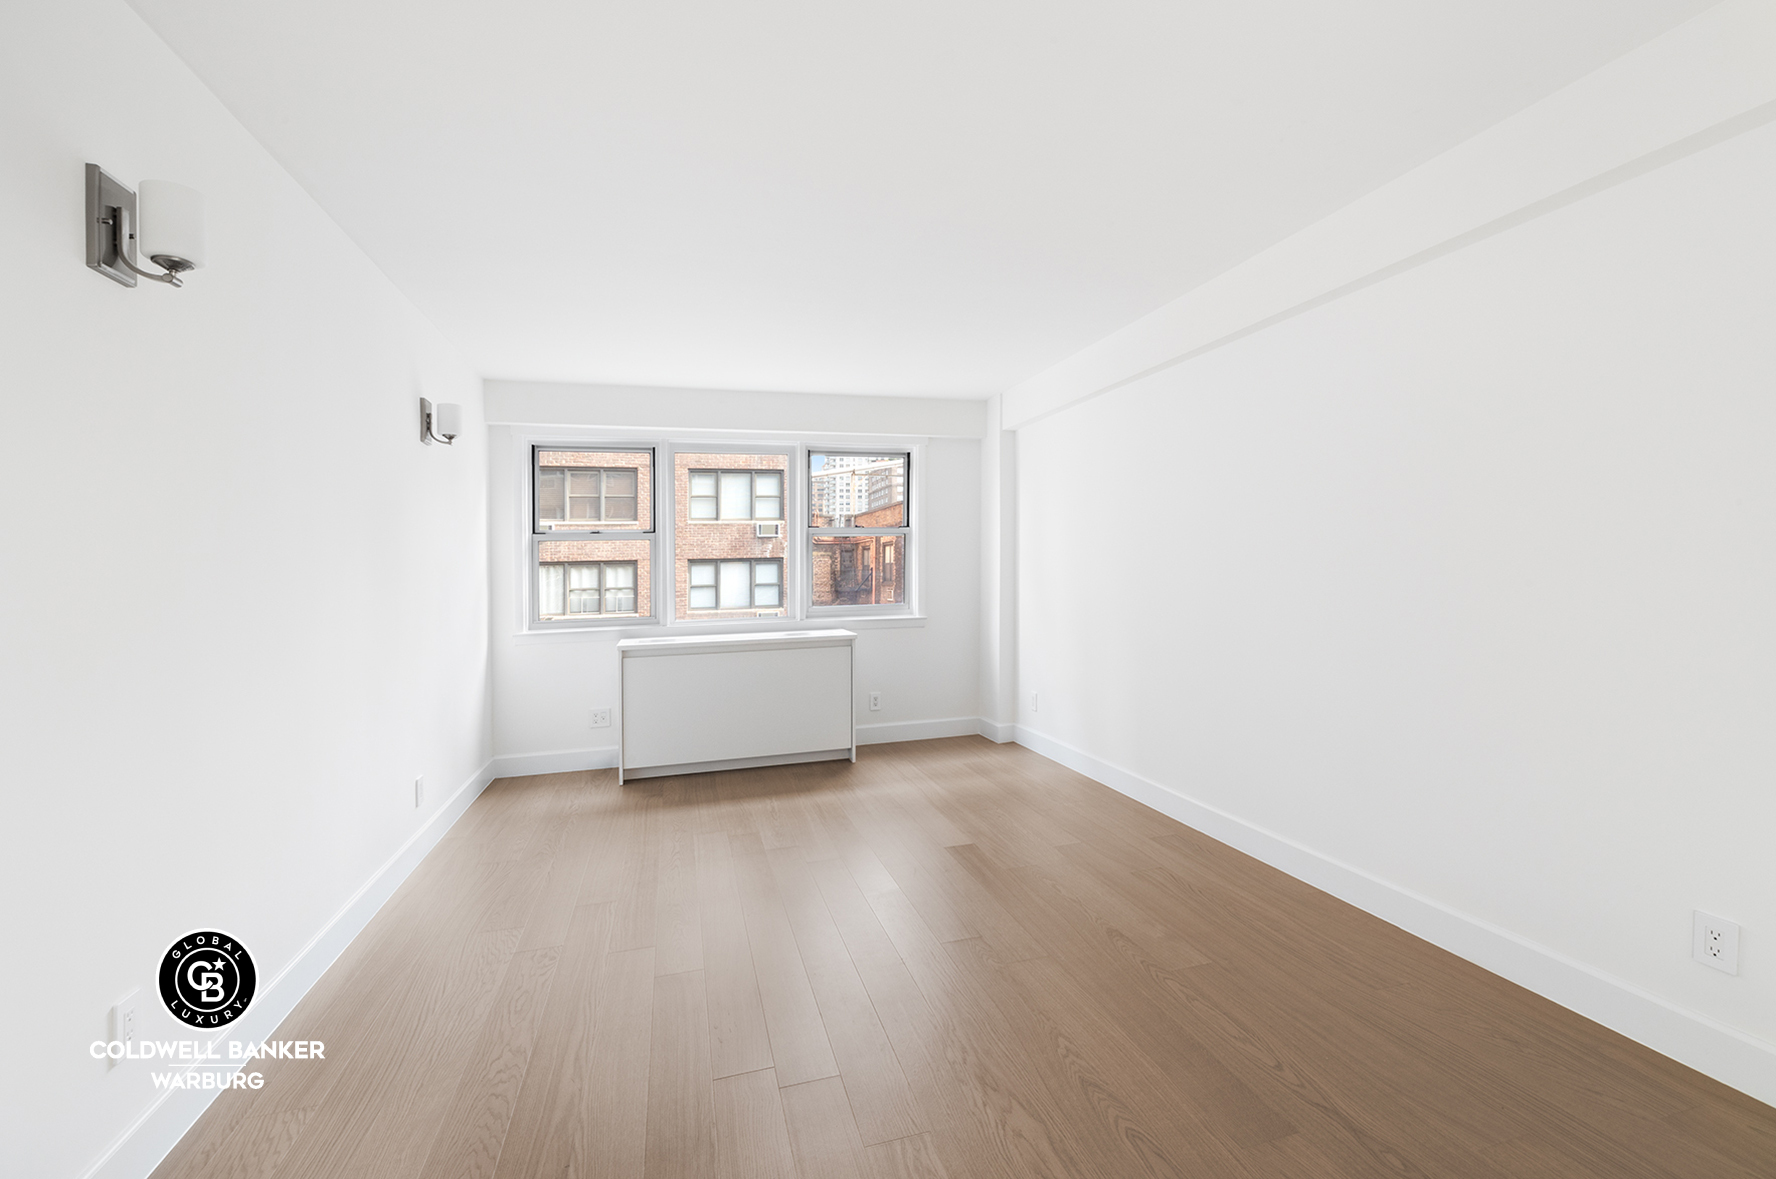 245 E 35th Street Unit 7H, New York, New York, 10016, United States, 1 Bedroom Bedrooms, ,1 BathroomBathrooms,Residential,For Sale,245 e 35th ST unit 7h,1491622